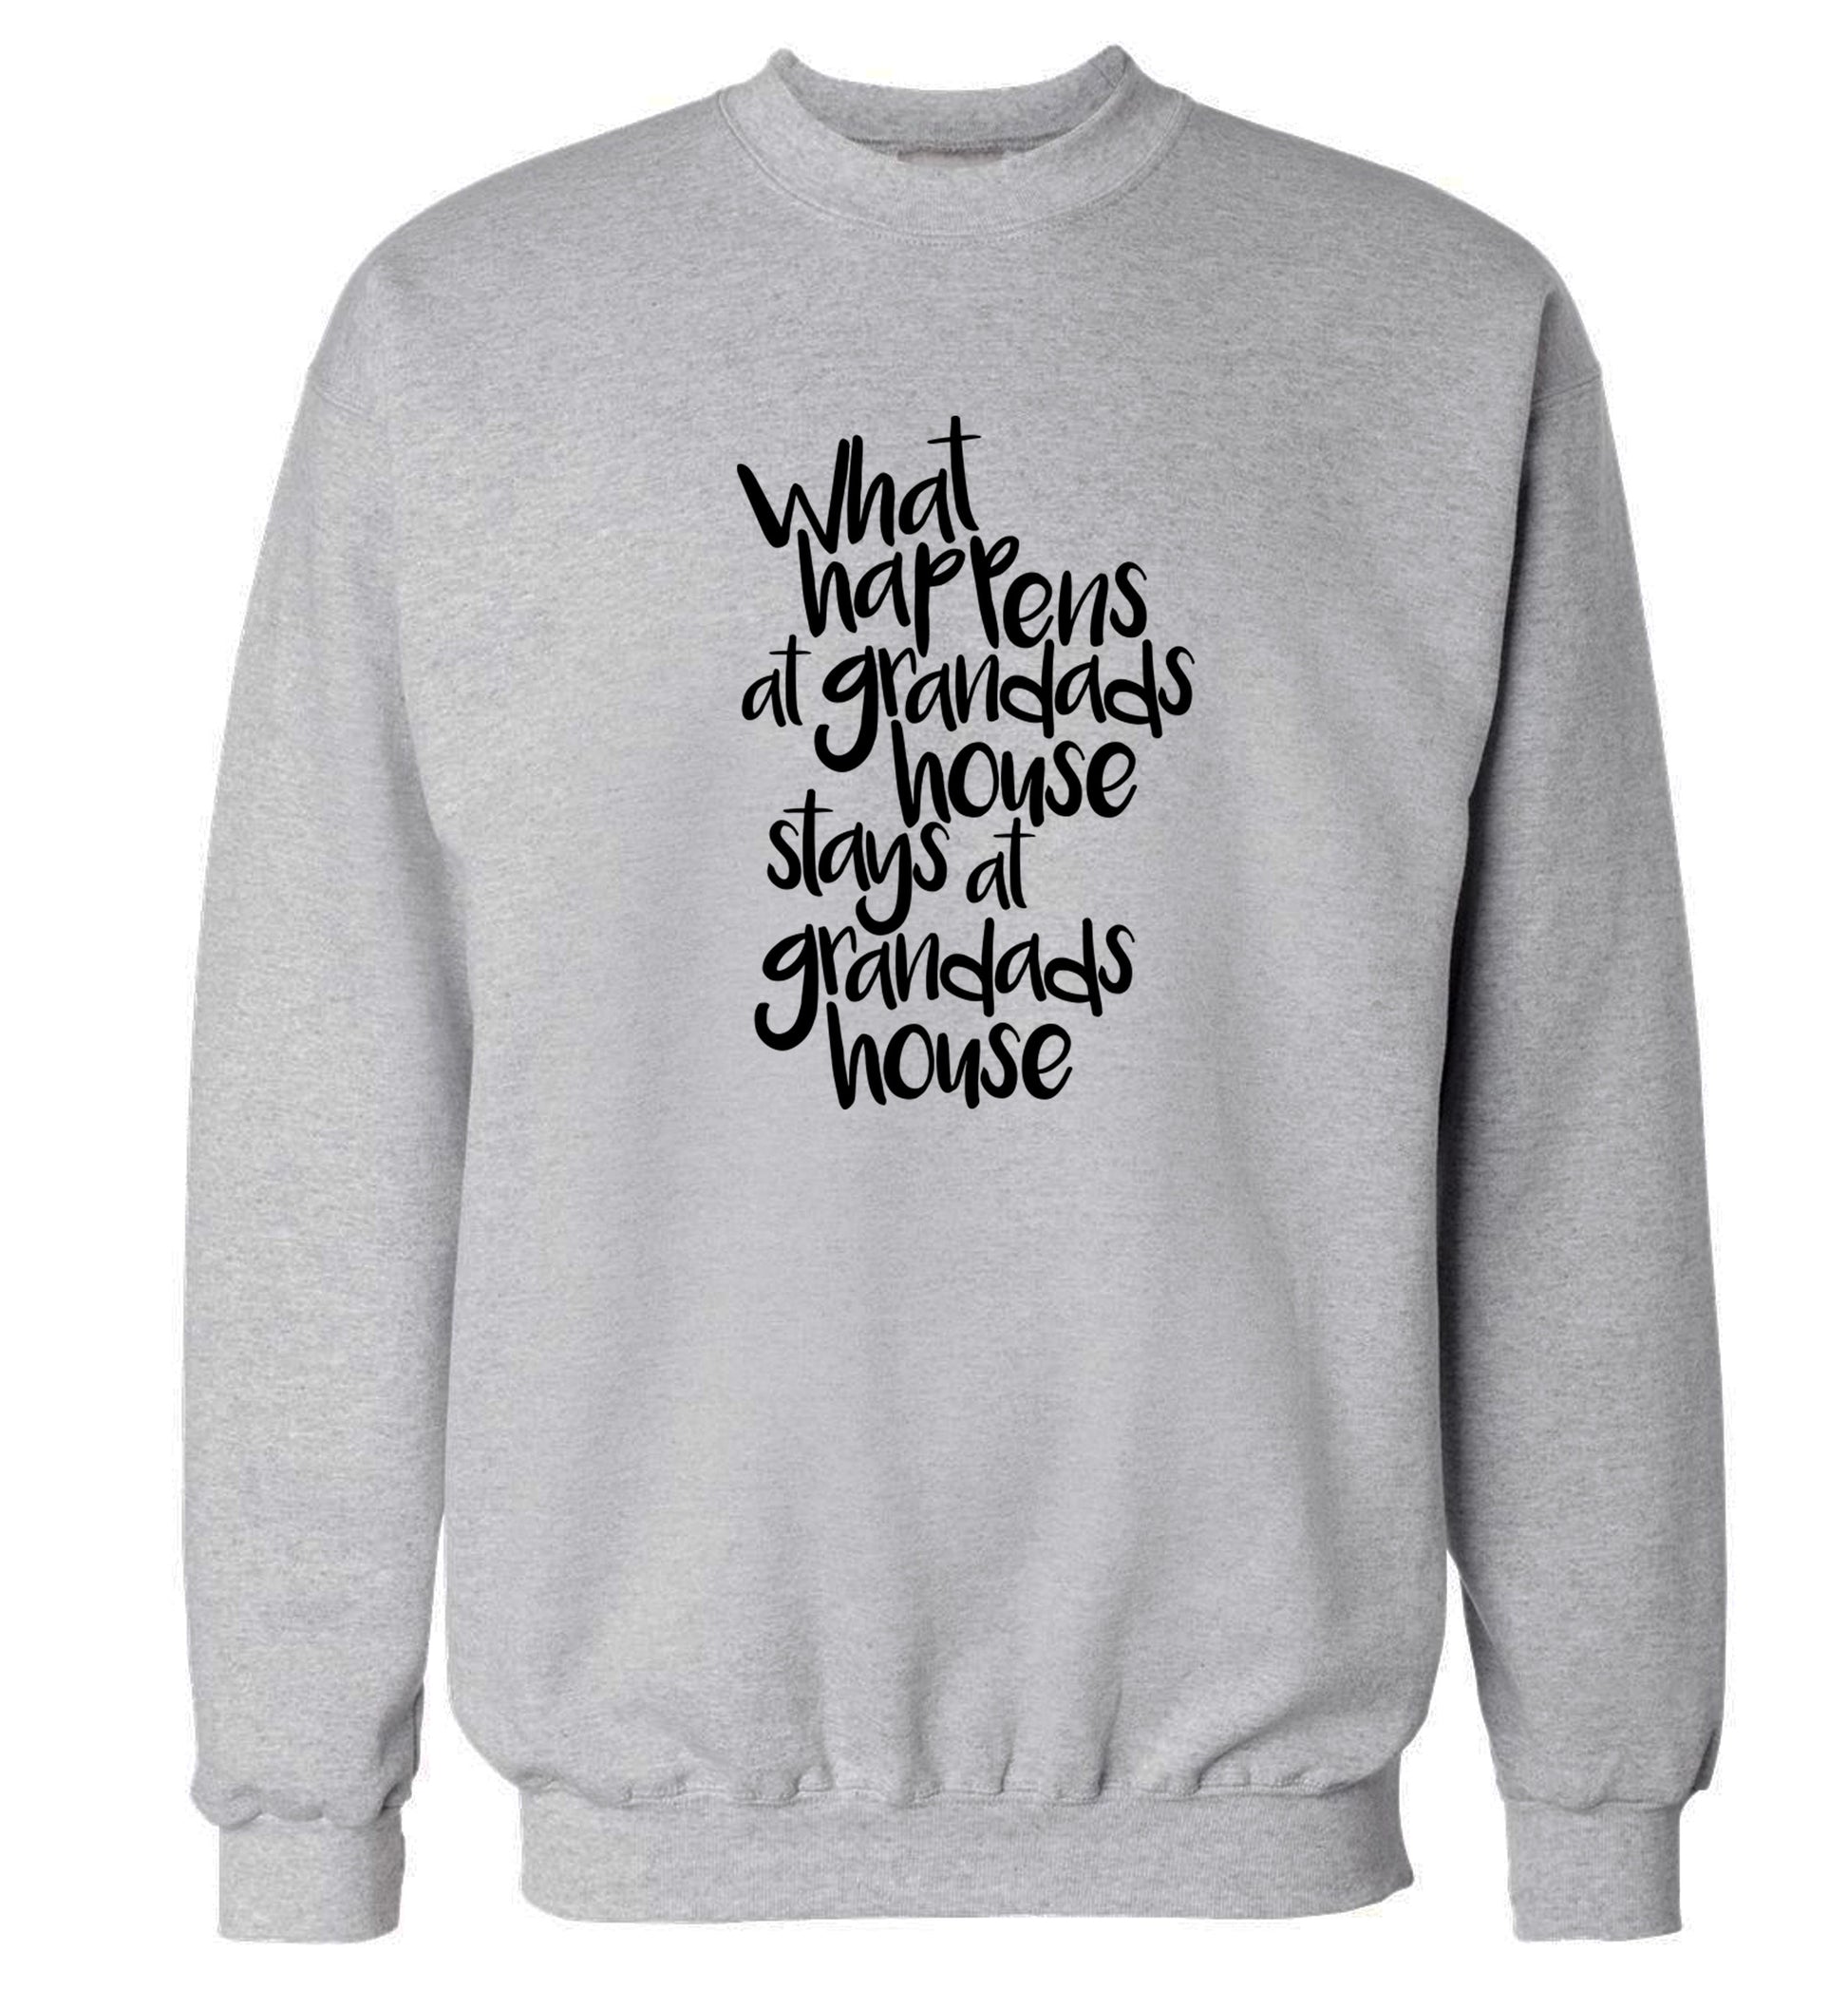 What happens at grandads house stays at grandads house Adult's unisex grey Sweater 2XL